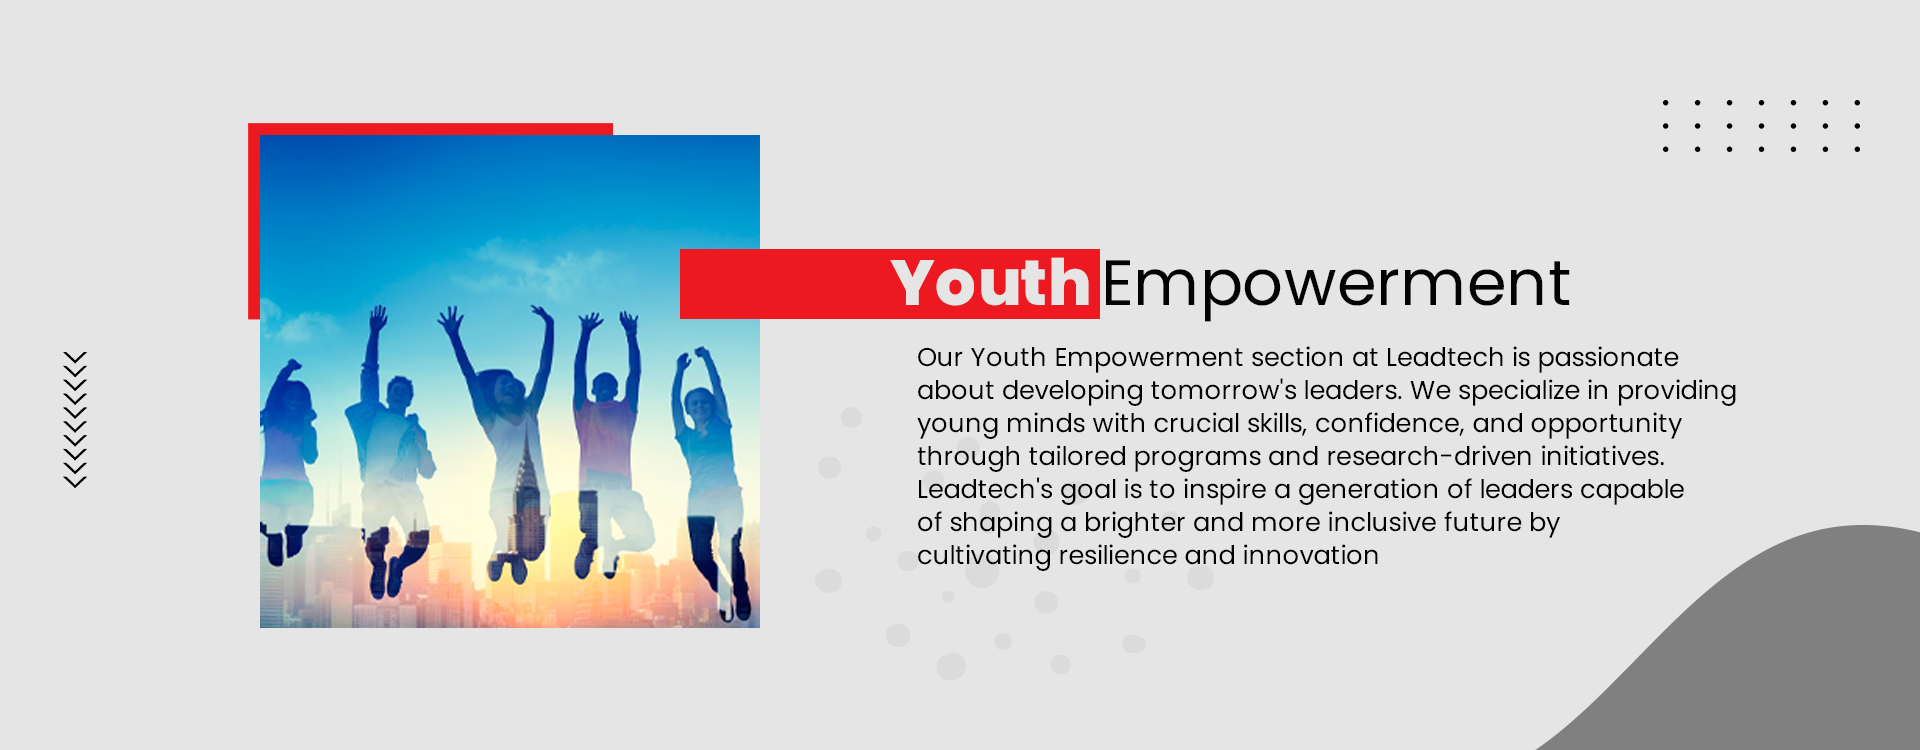 Youth Empowerment